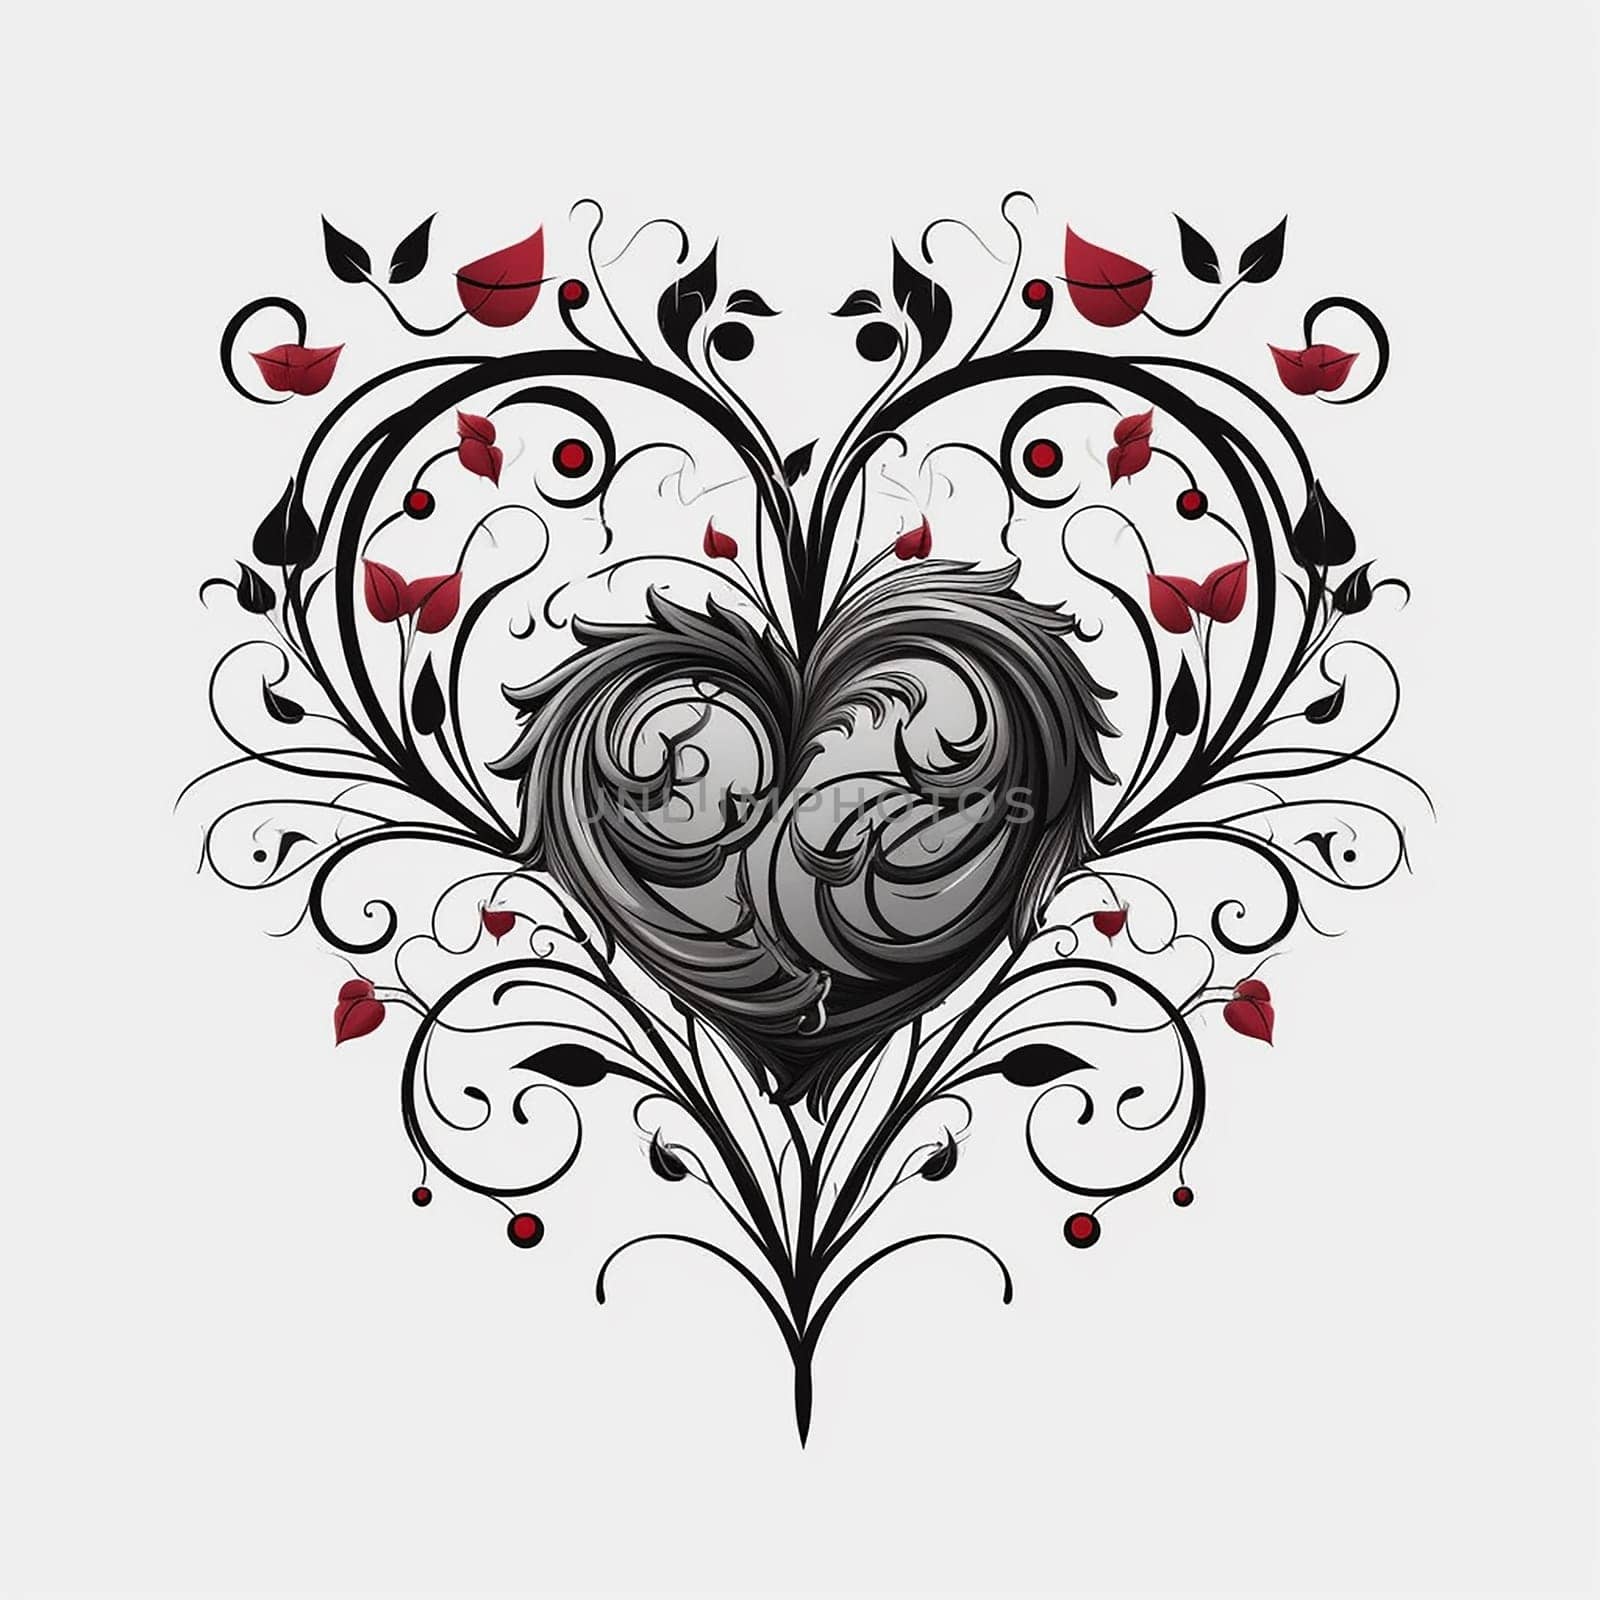 Ornate heart intertwined with floral patterns and red accents. by Hype2art